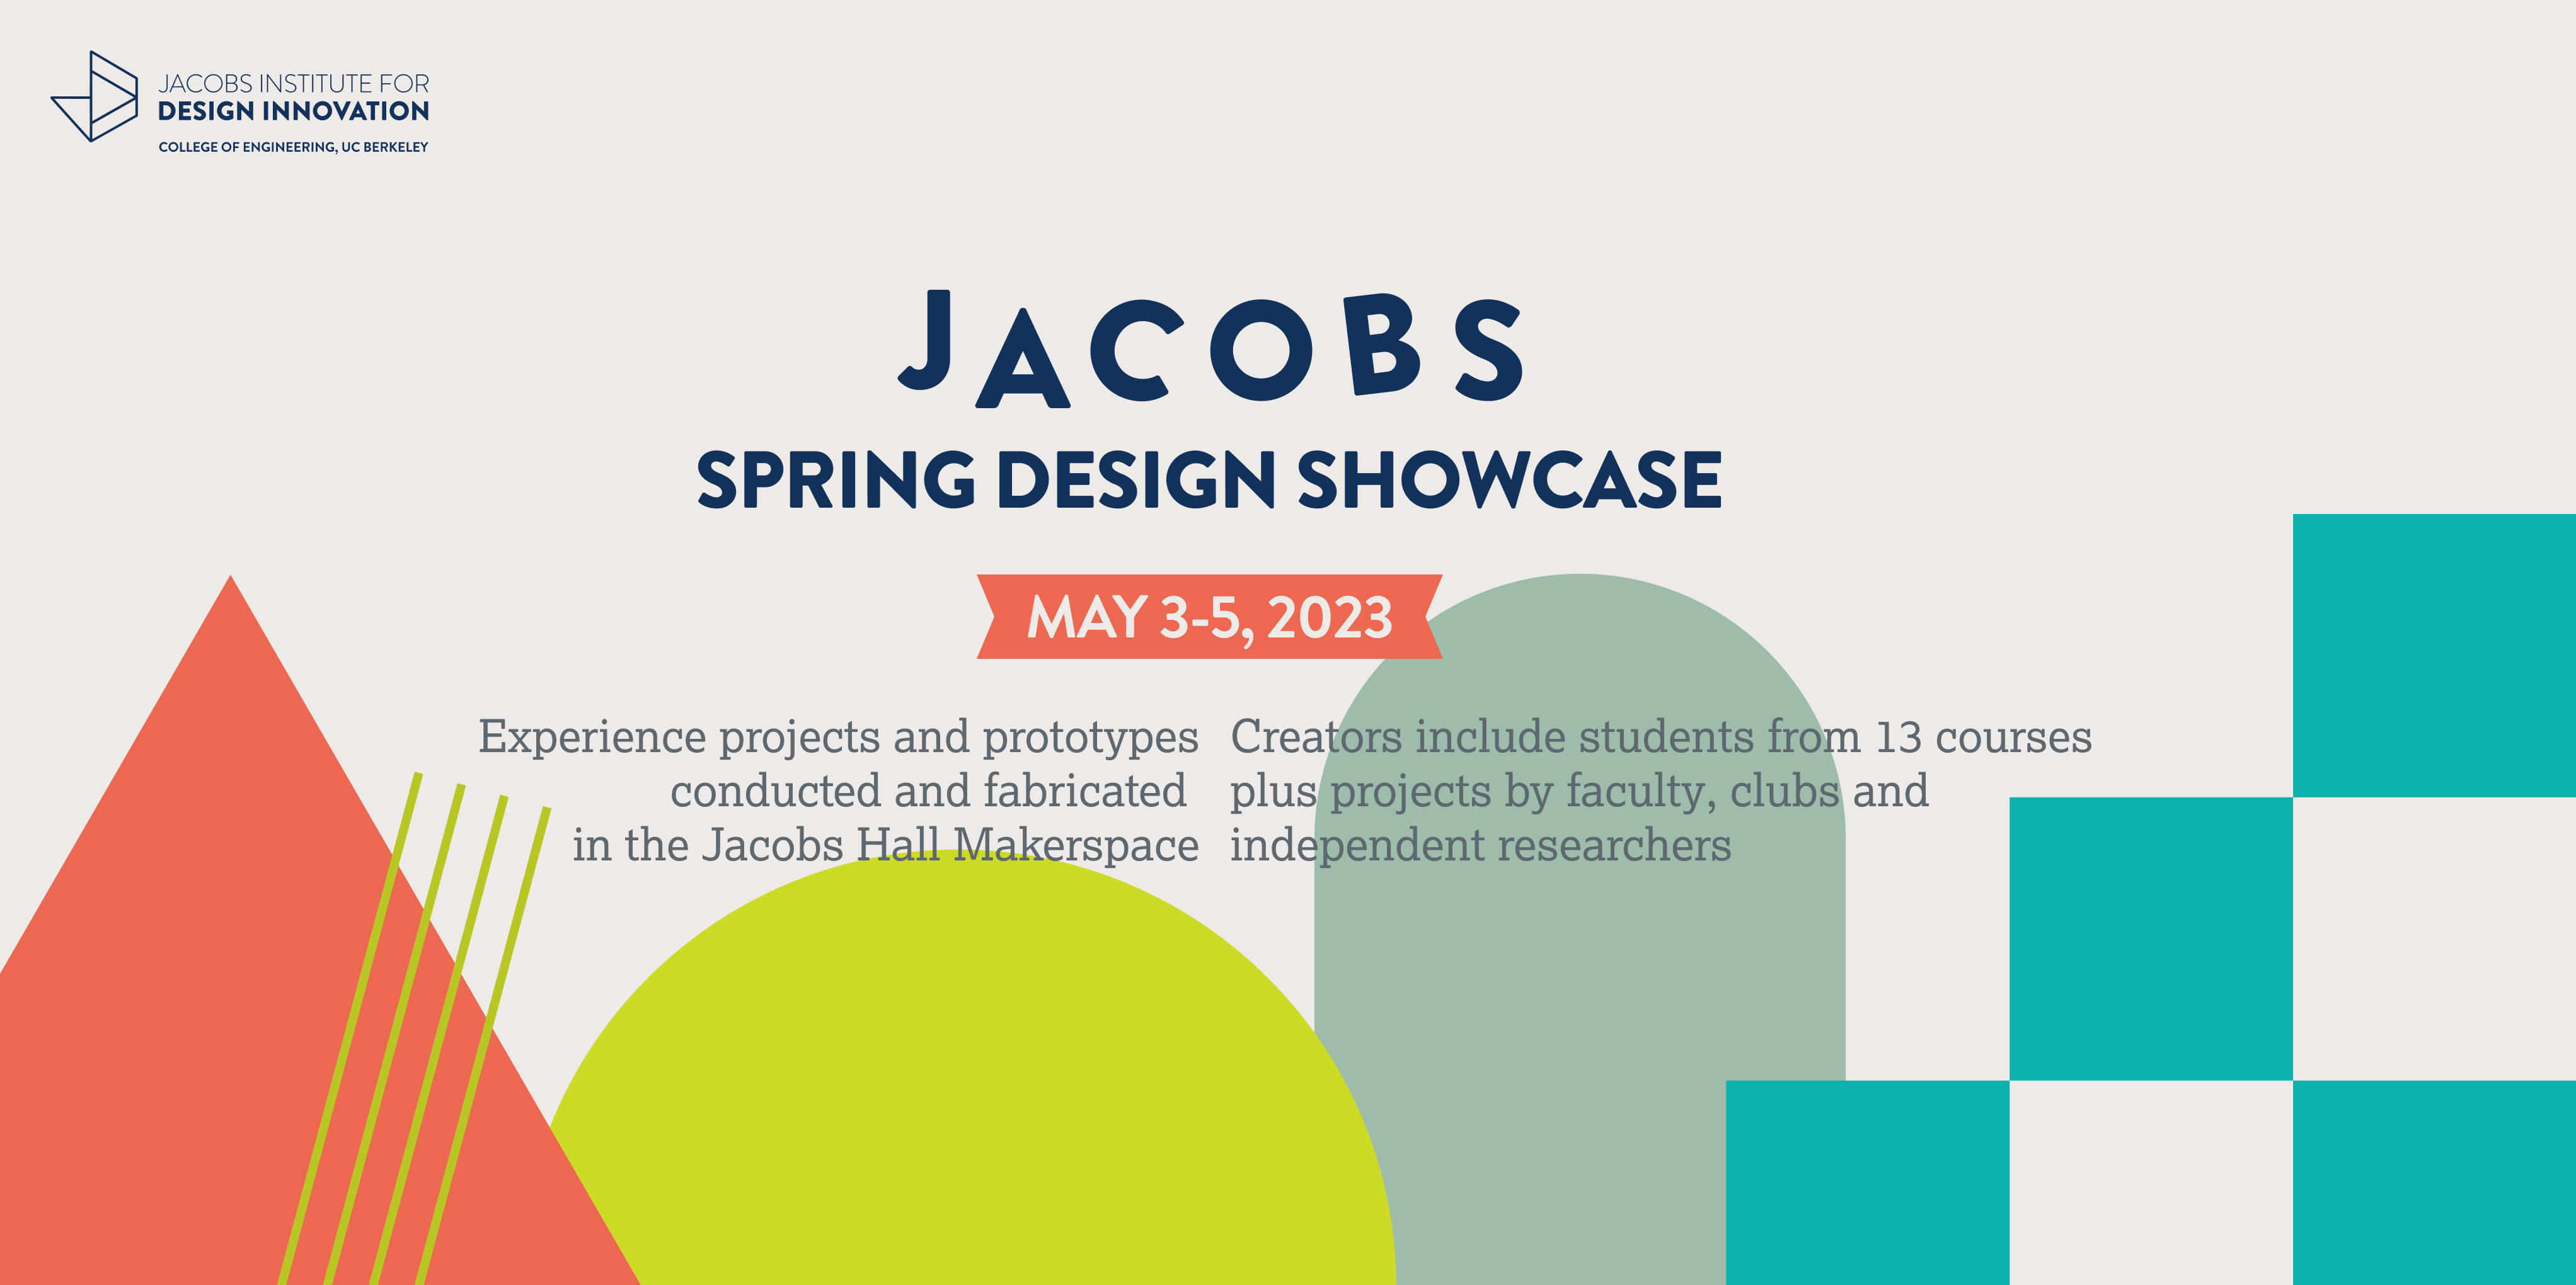 The Spring 2023 Design Showcase is May 3-5